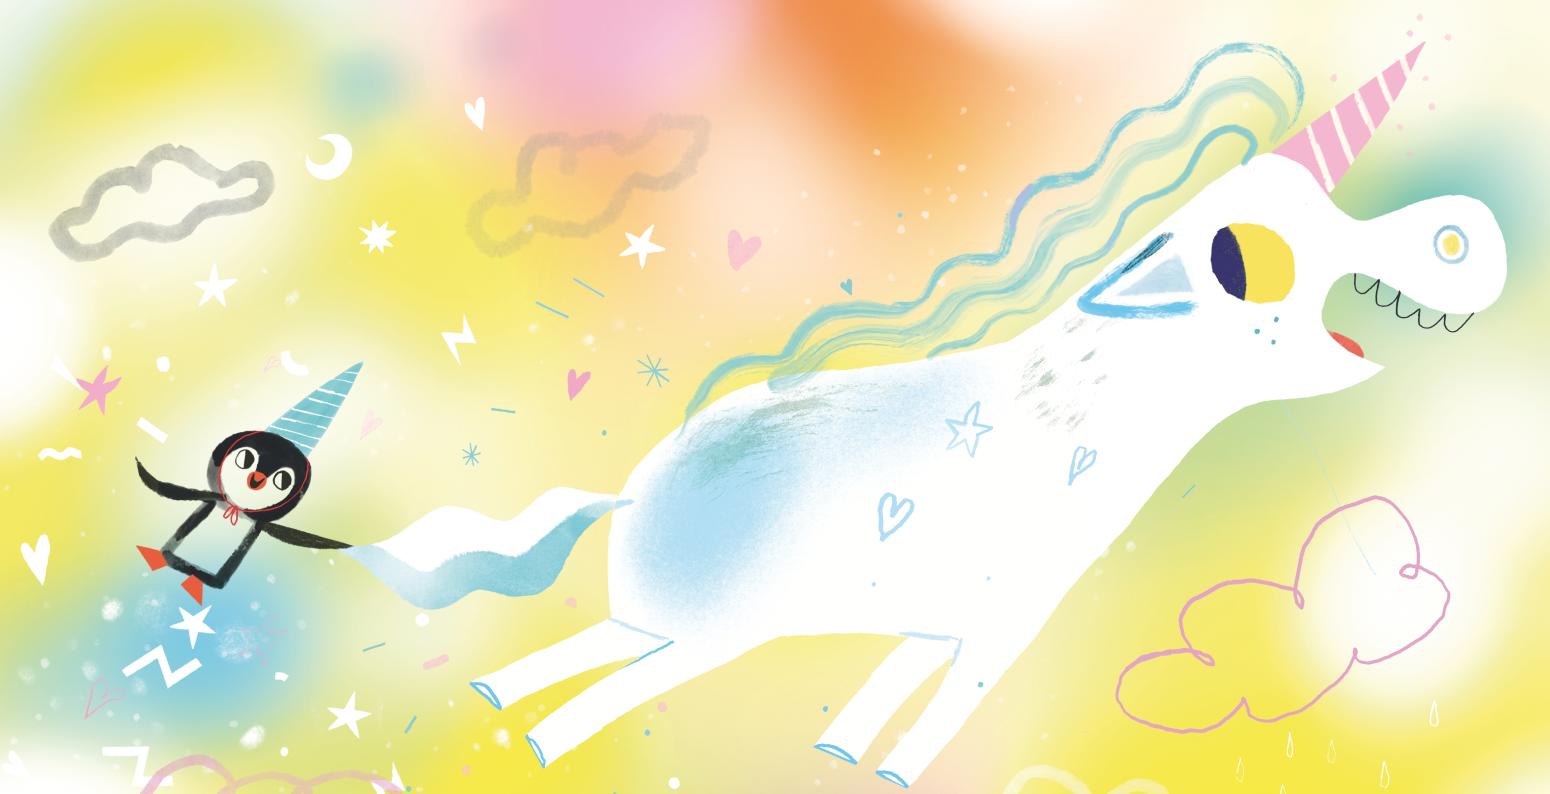 A penguin and unicorn fly in the sky surrounded by clouds and soft pastel colors.